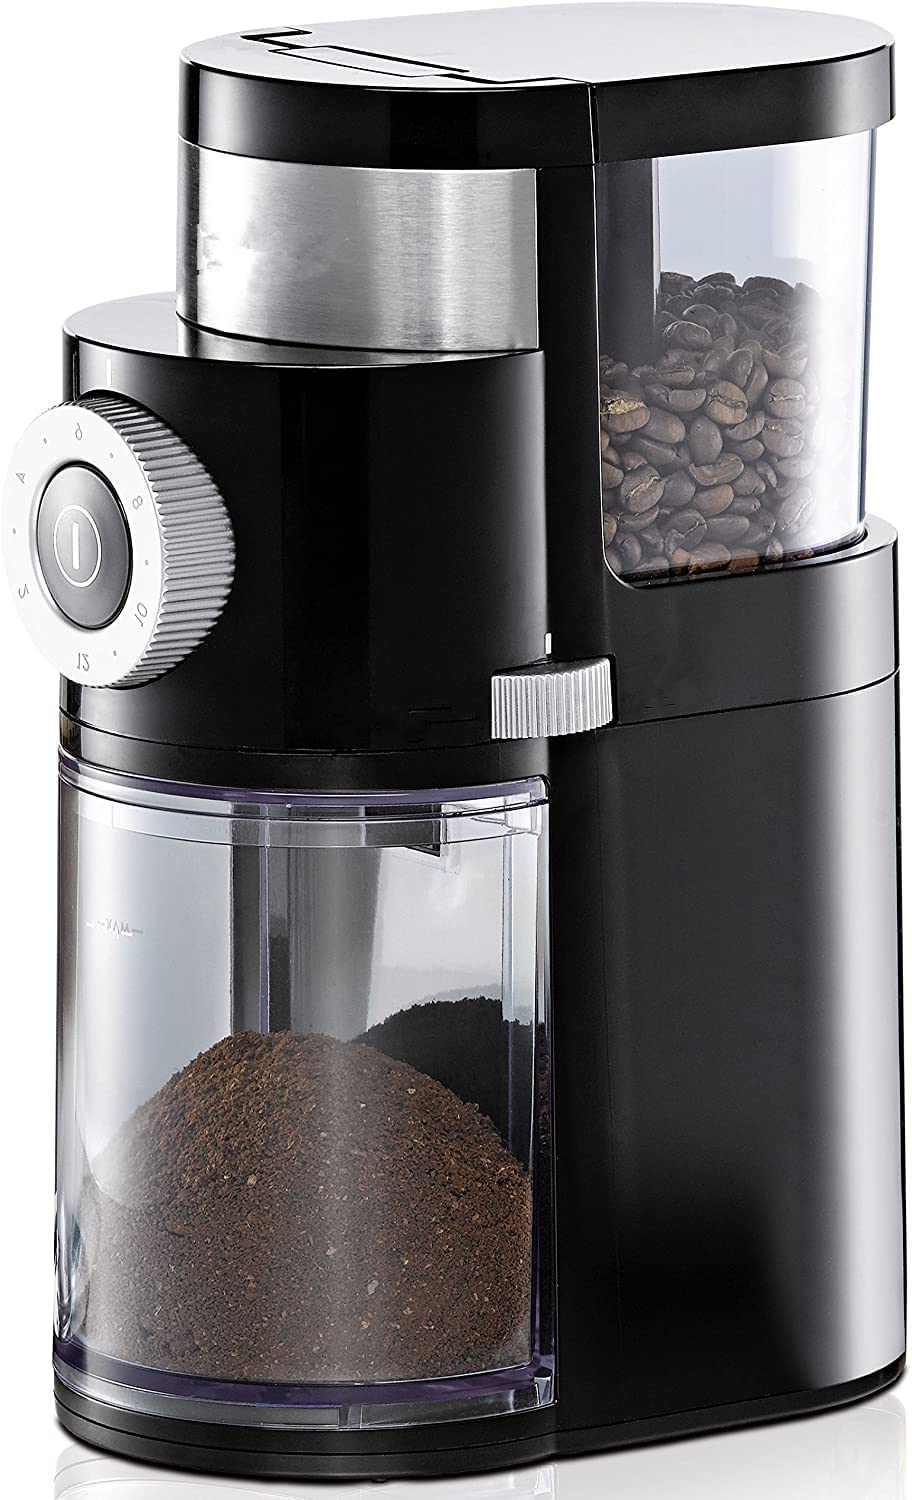 meideng Coffee Grinder Aroma Preservating Disc Mill, Grinding Level from Coarse to Fine Adjustable, 2-12 Servings, Bean Container Capacity 250 g, 110 Watt, Black